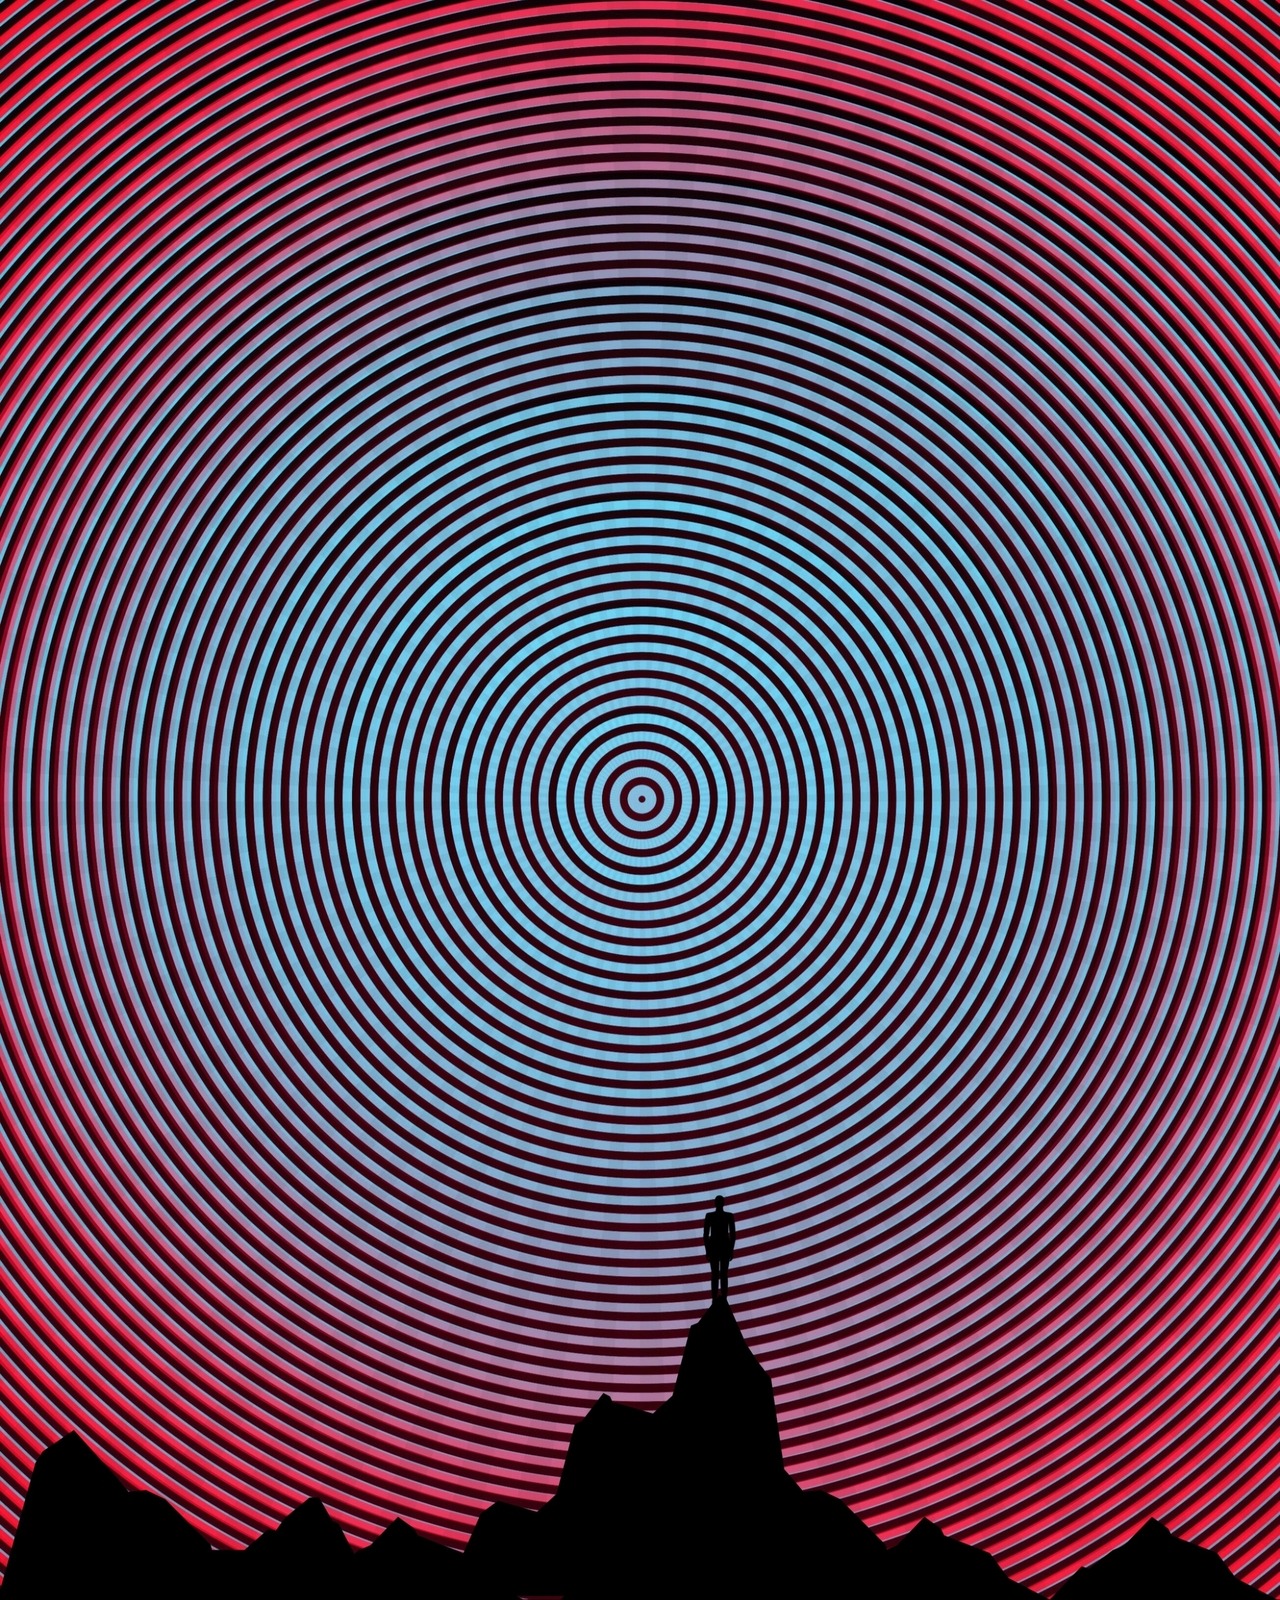 A trippy picture of a silhouette of a mountain with a vibrant pattern behind it